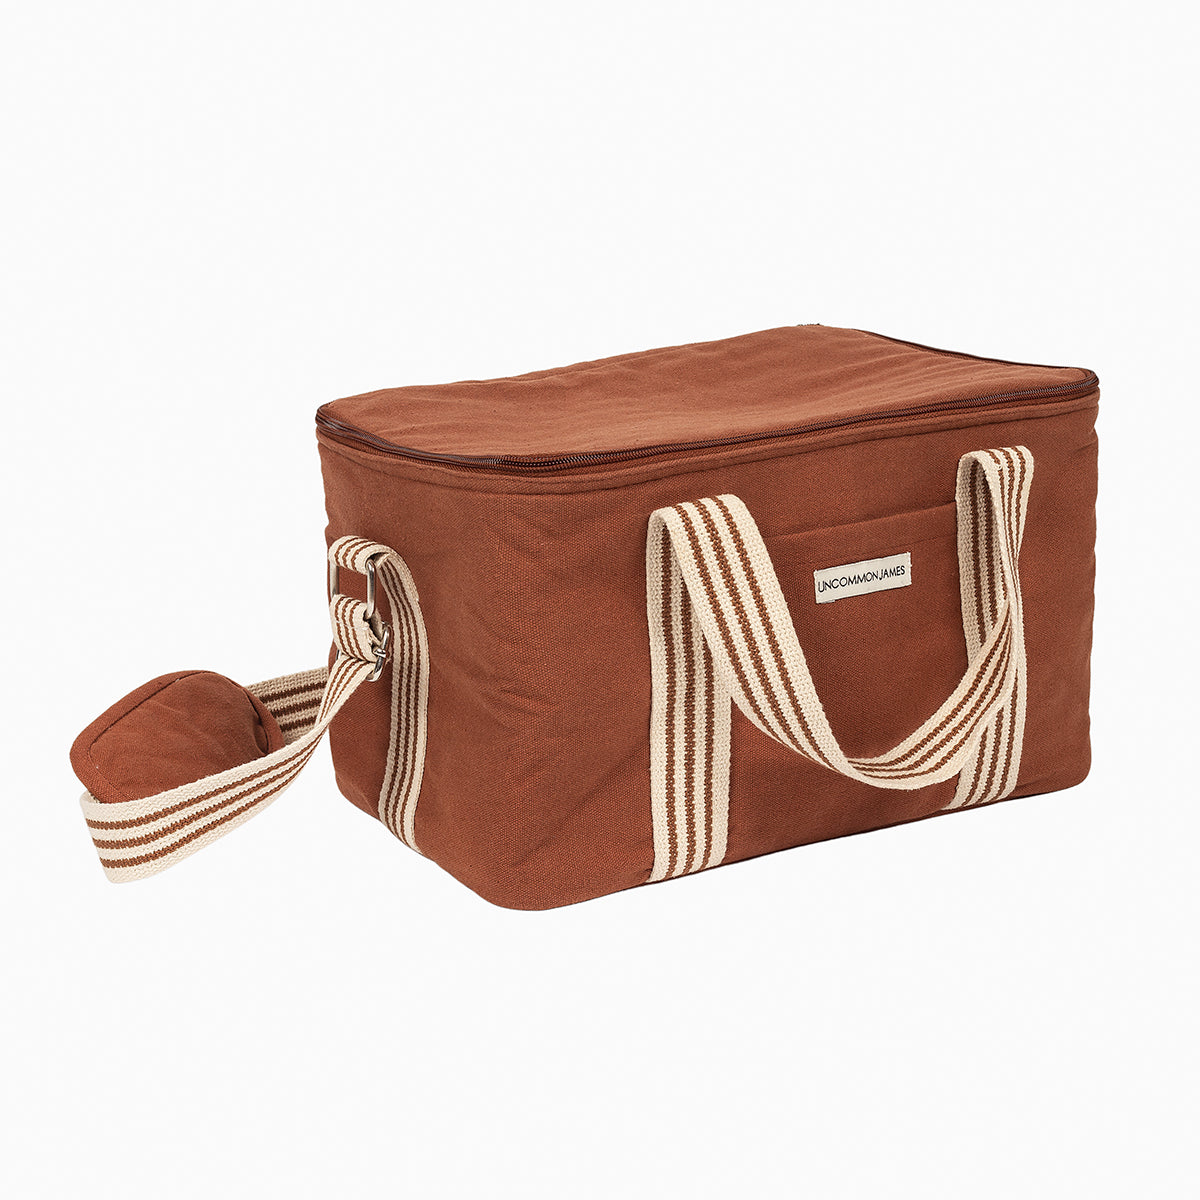 Weekender Collapsible Cooler | Product Image | Uncommon James Home